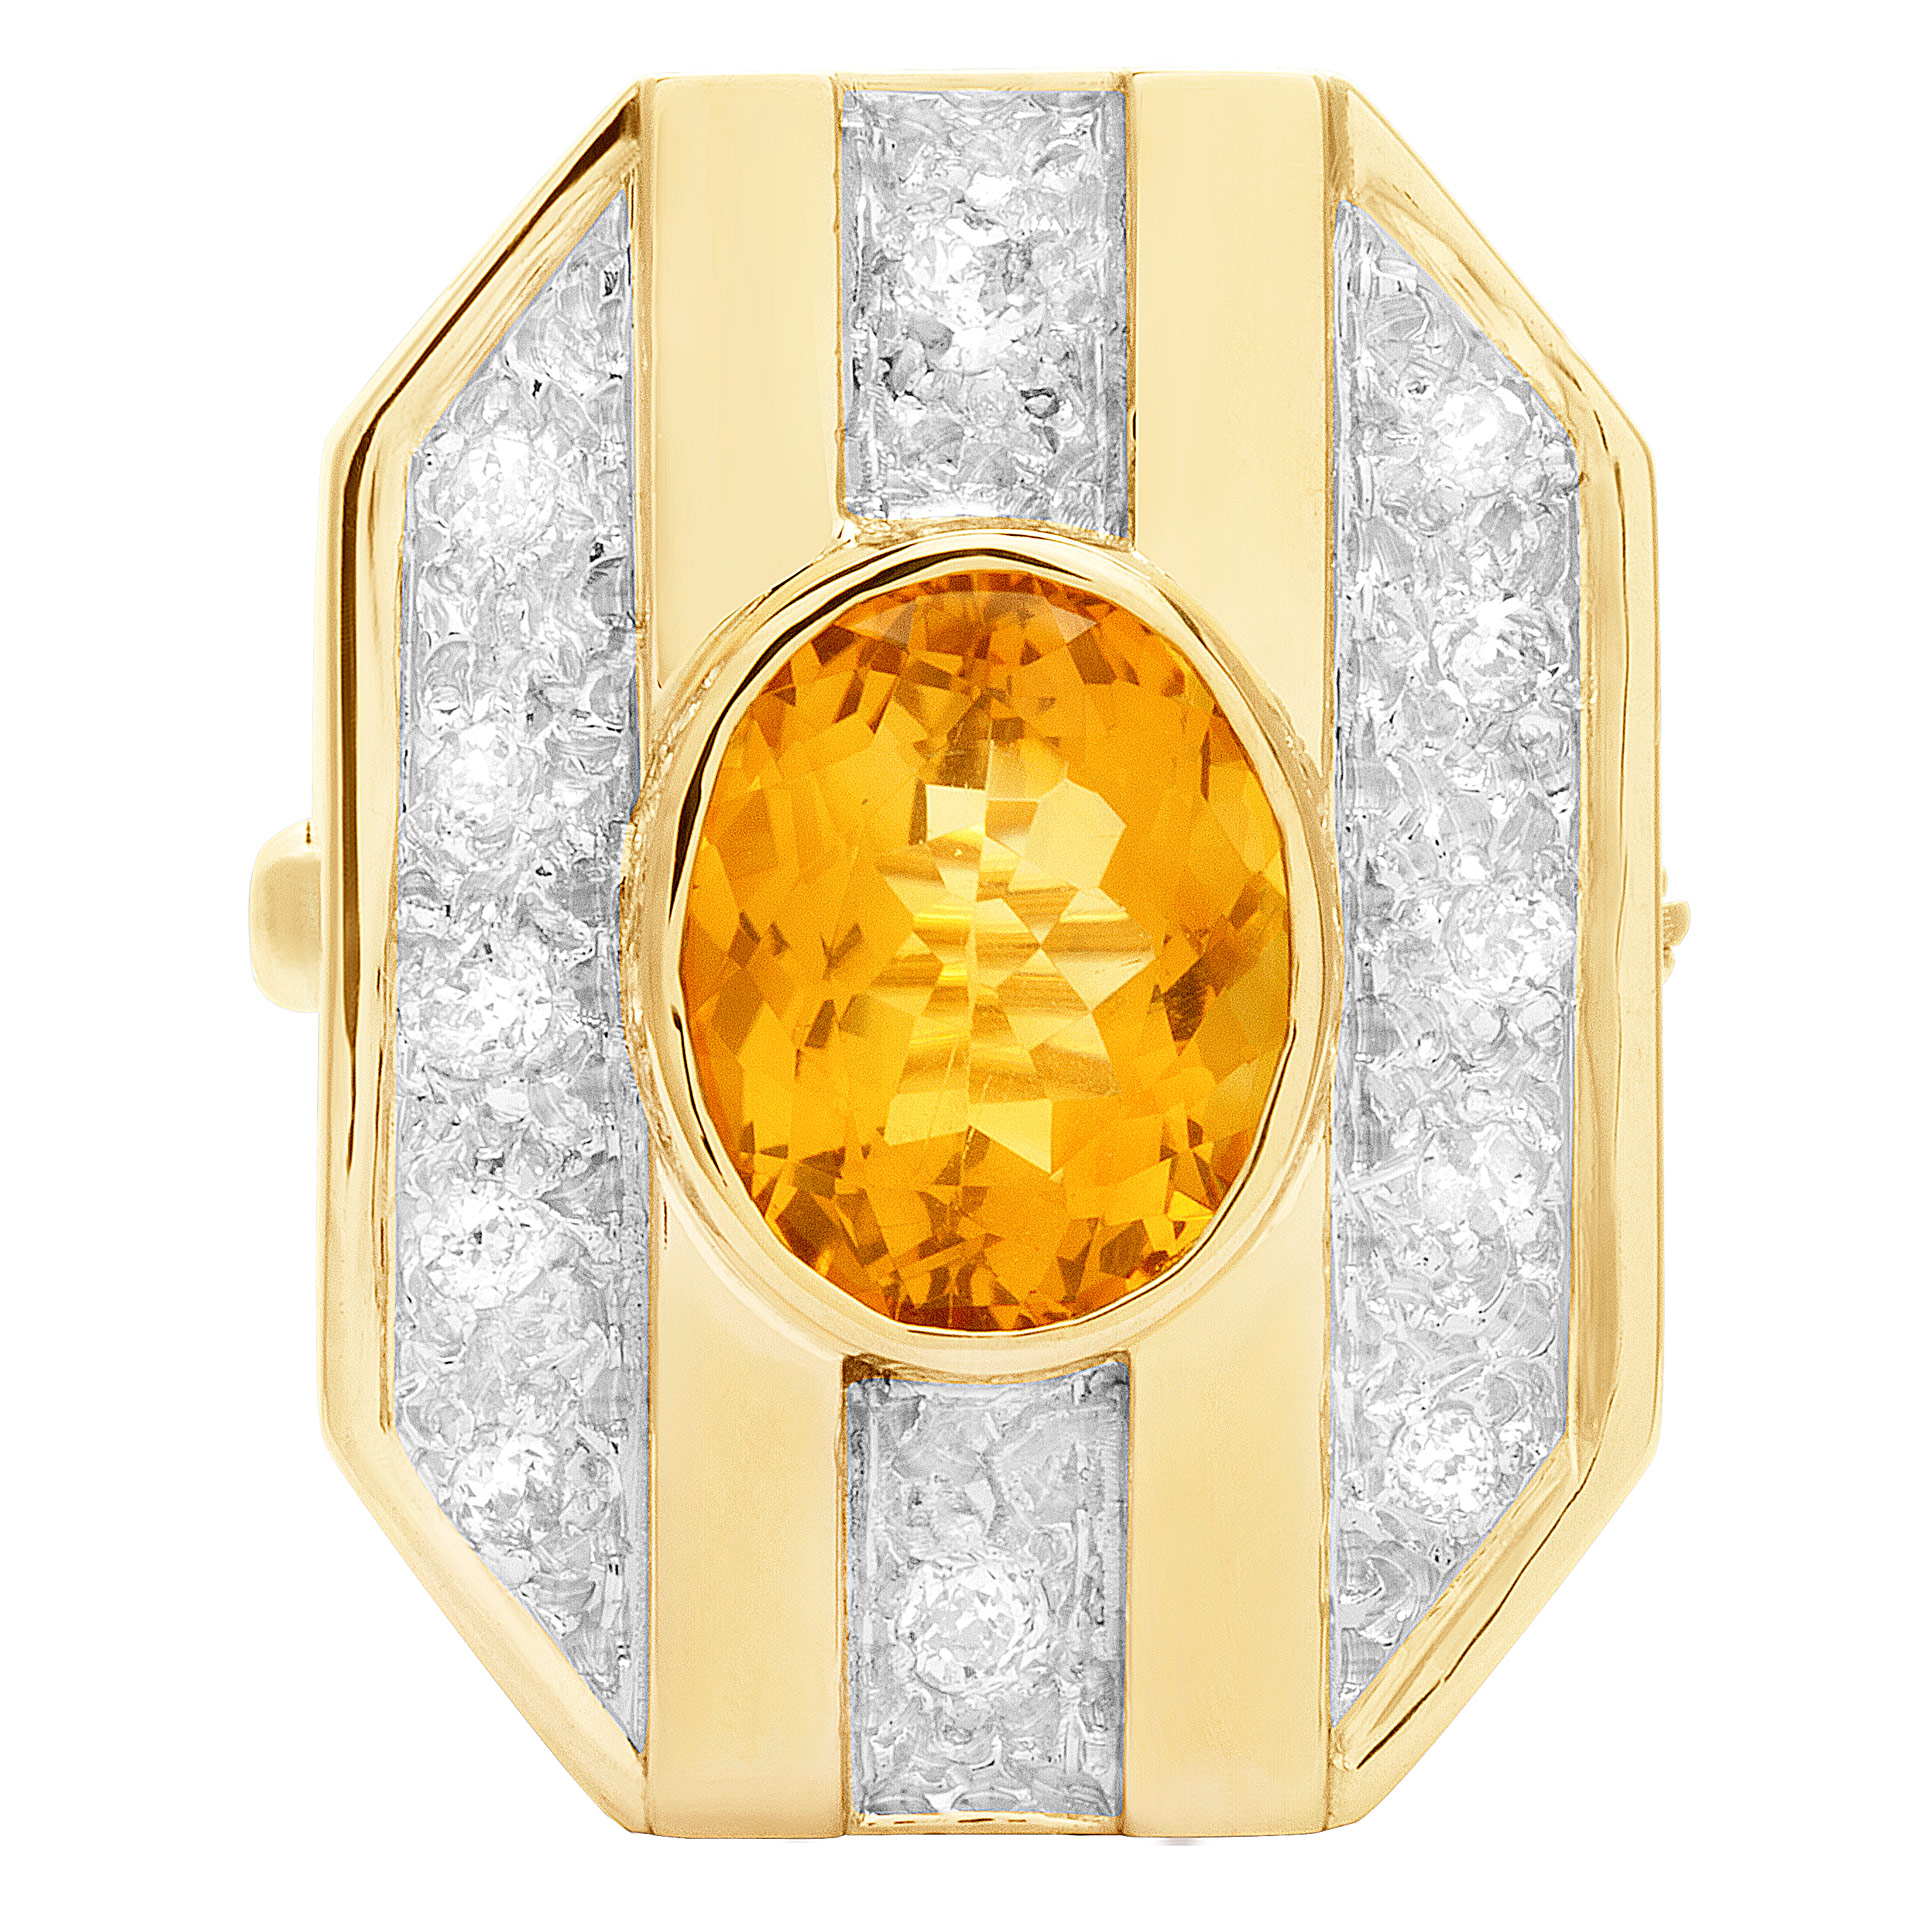 Brooch/Enhancer with citrine & diamond accents in 14k yellow gold. Approx. 1 carat in diamonds